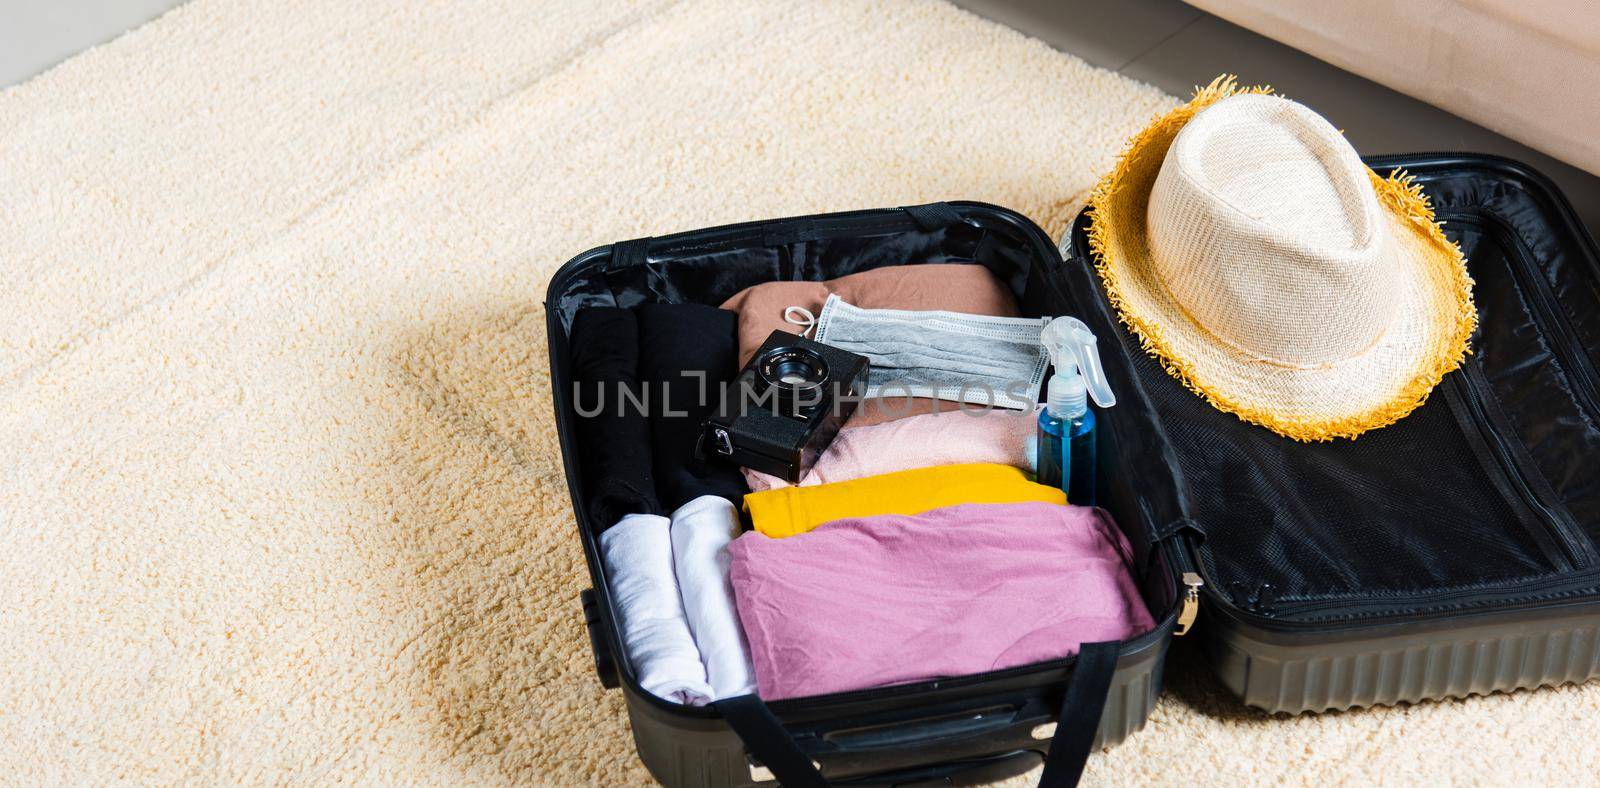 Open suitcase with traveler belongings clothes and accessories of things ready packing to be taken on summer holiday by Sorapop